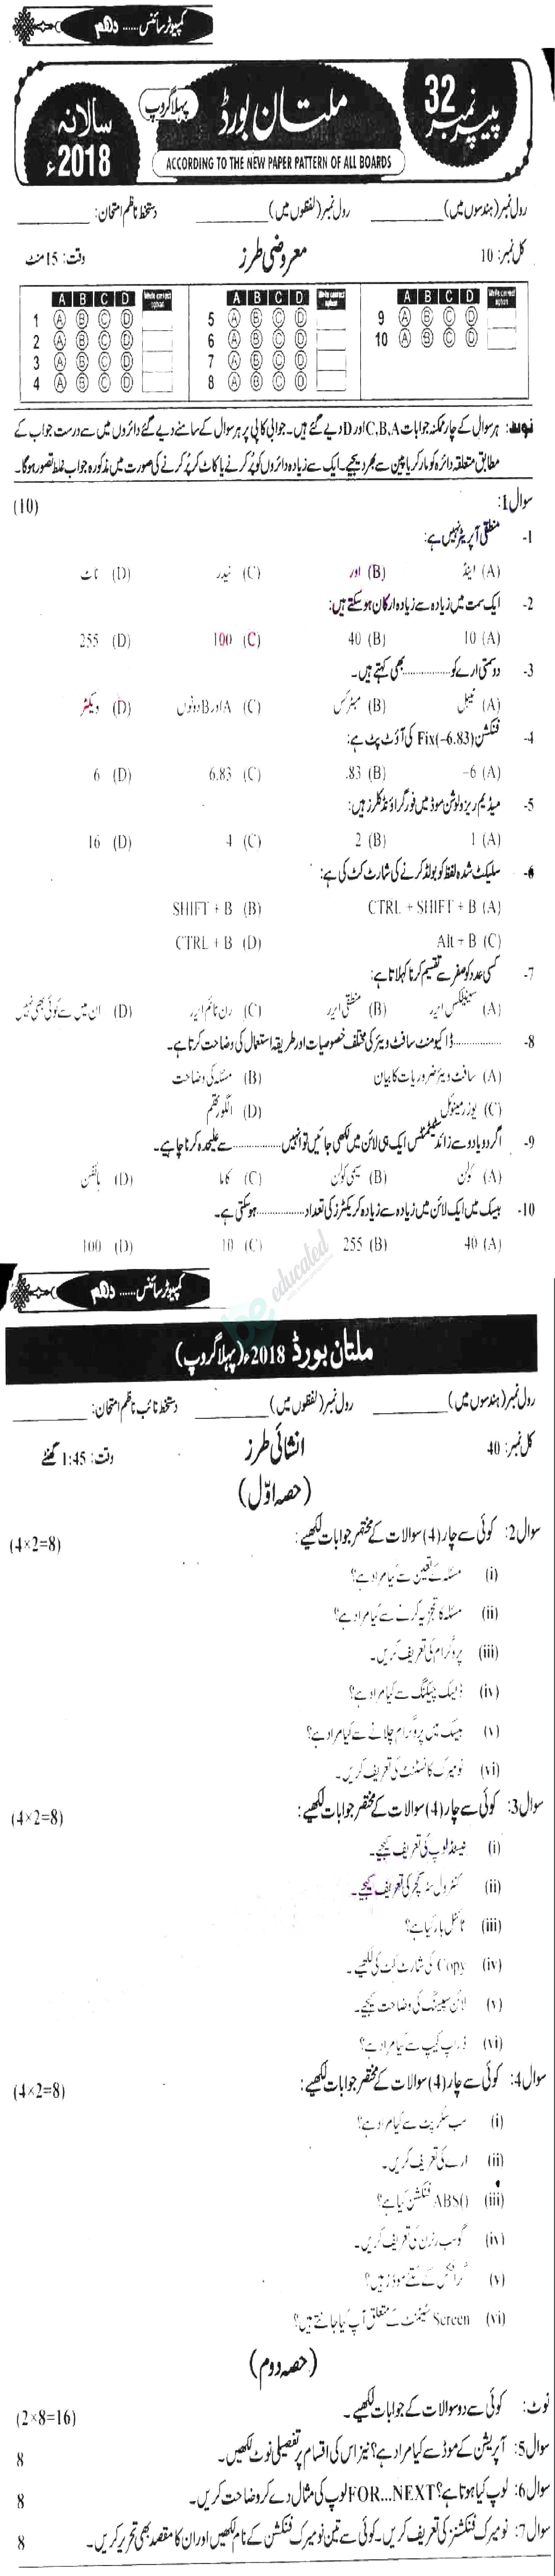 Computer Science 10th class Past Paper Group 1 BISE Multan 2018